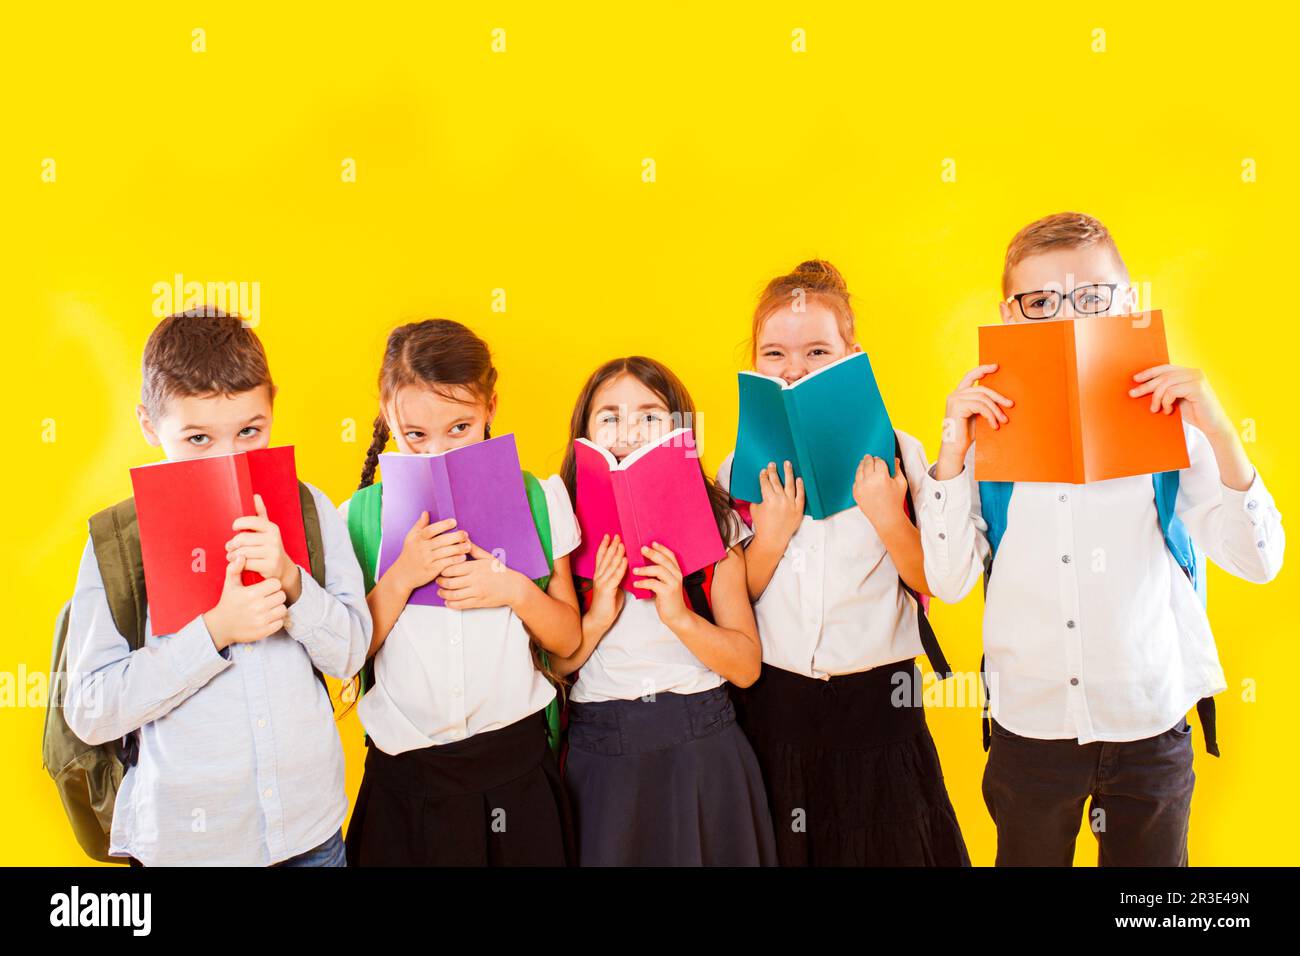 Happy schoolkids standing with colorful books isolated on yellow background. Kids hiding face behind books Stock Photo